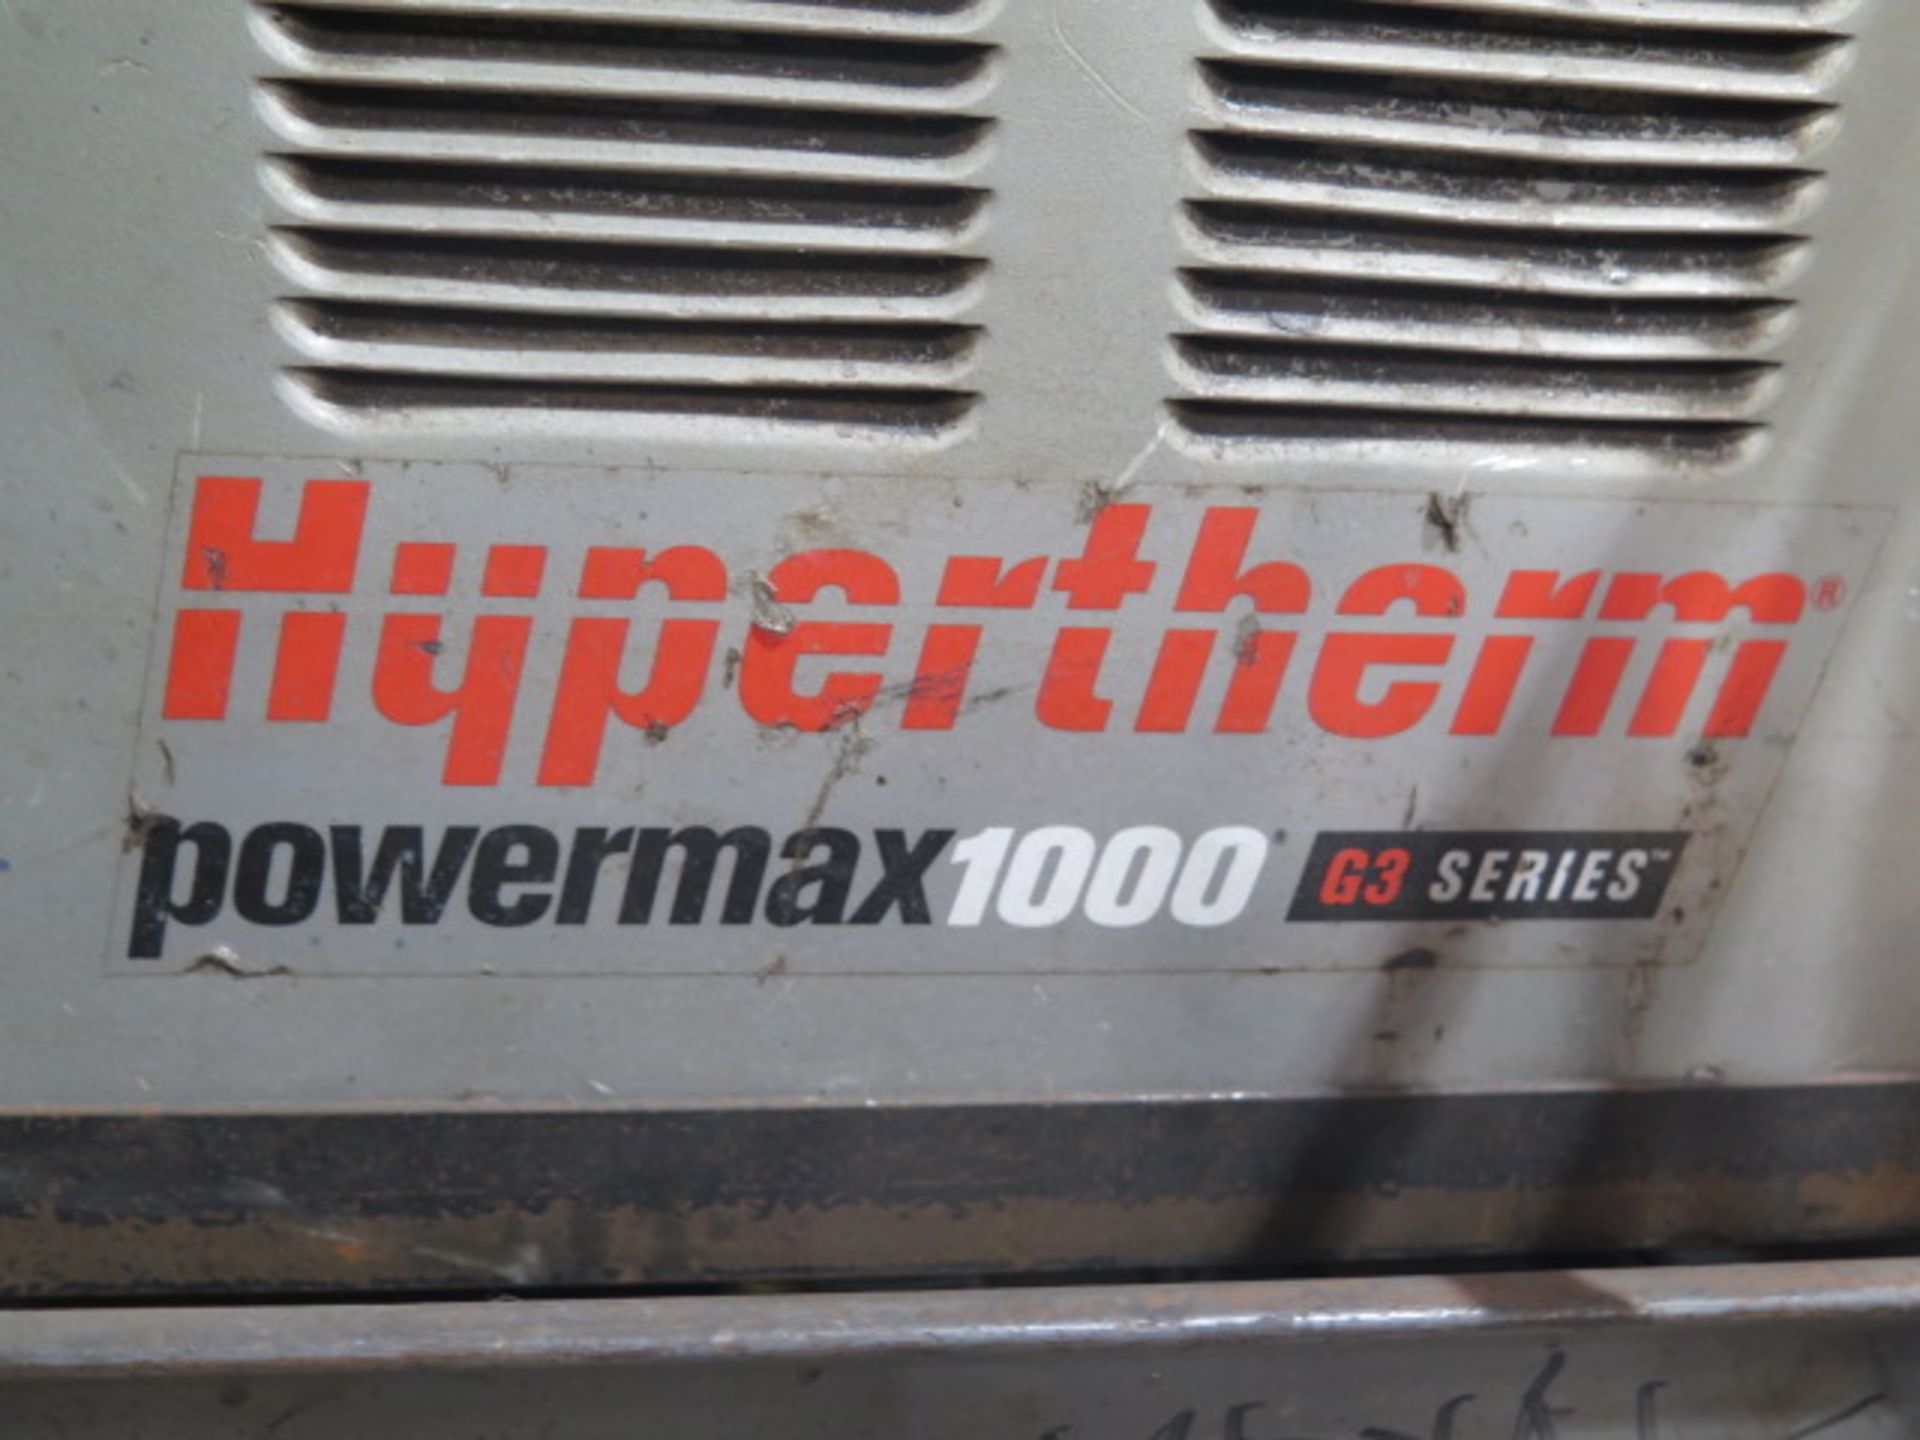 Hypertherm PowerMax 1000 Plasma Cutting Power Source w/ Cart (SOLD AS-IS - NO WARRANTY) - Image 6 of 6